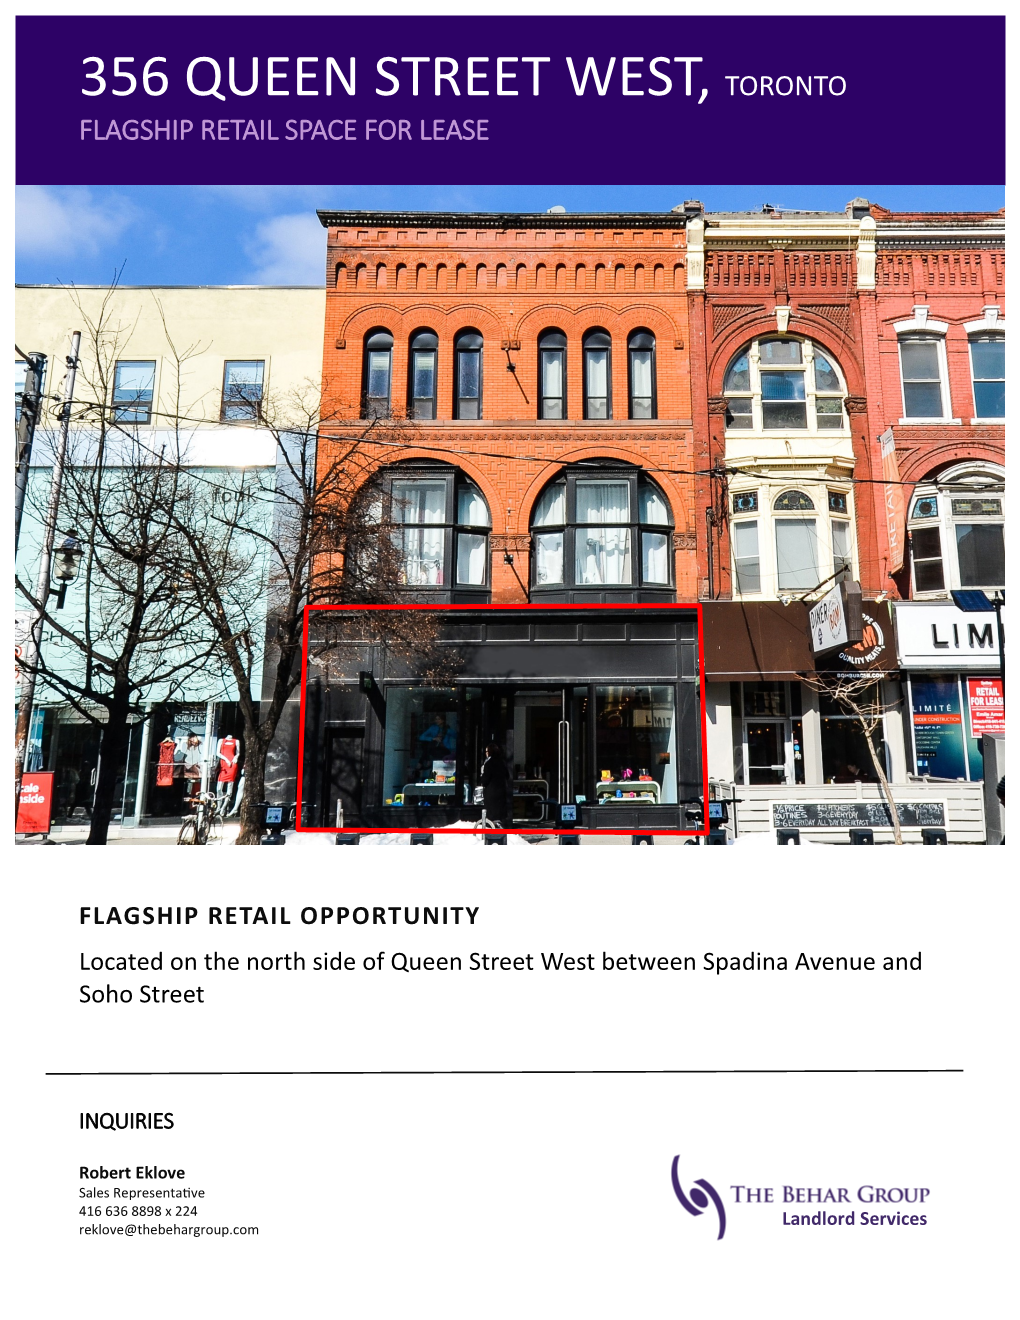 356 Queen Street West, Toronto Flagship Retail Space for Lease